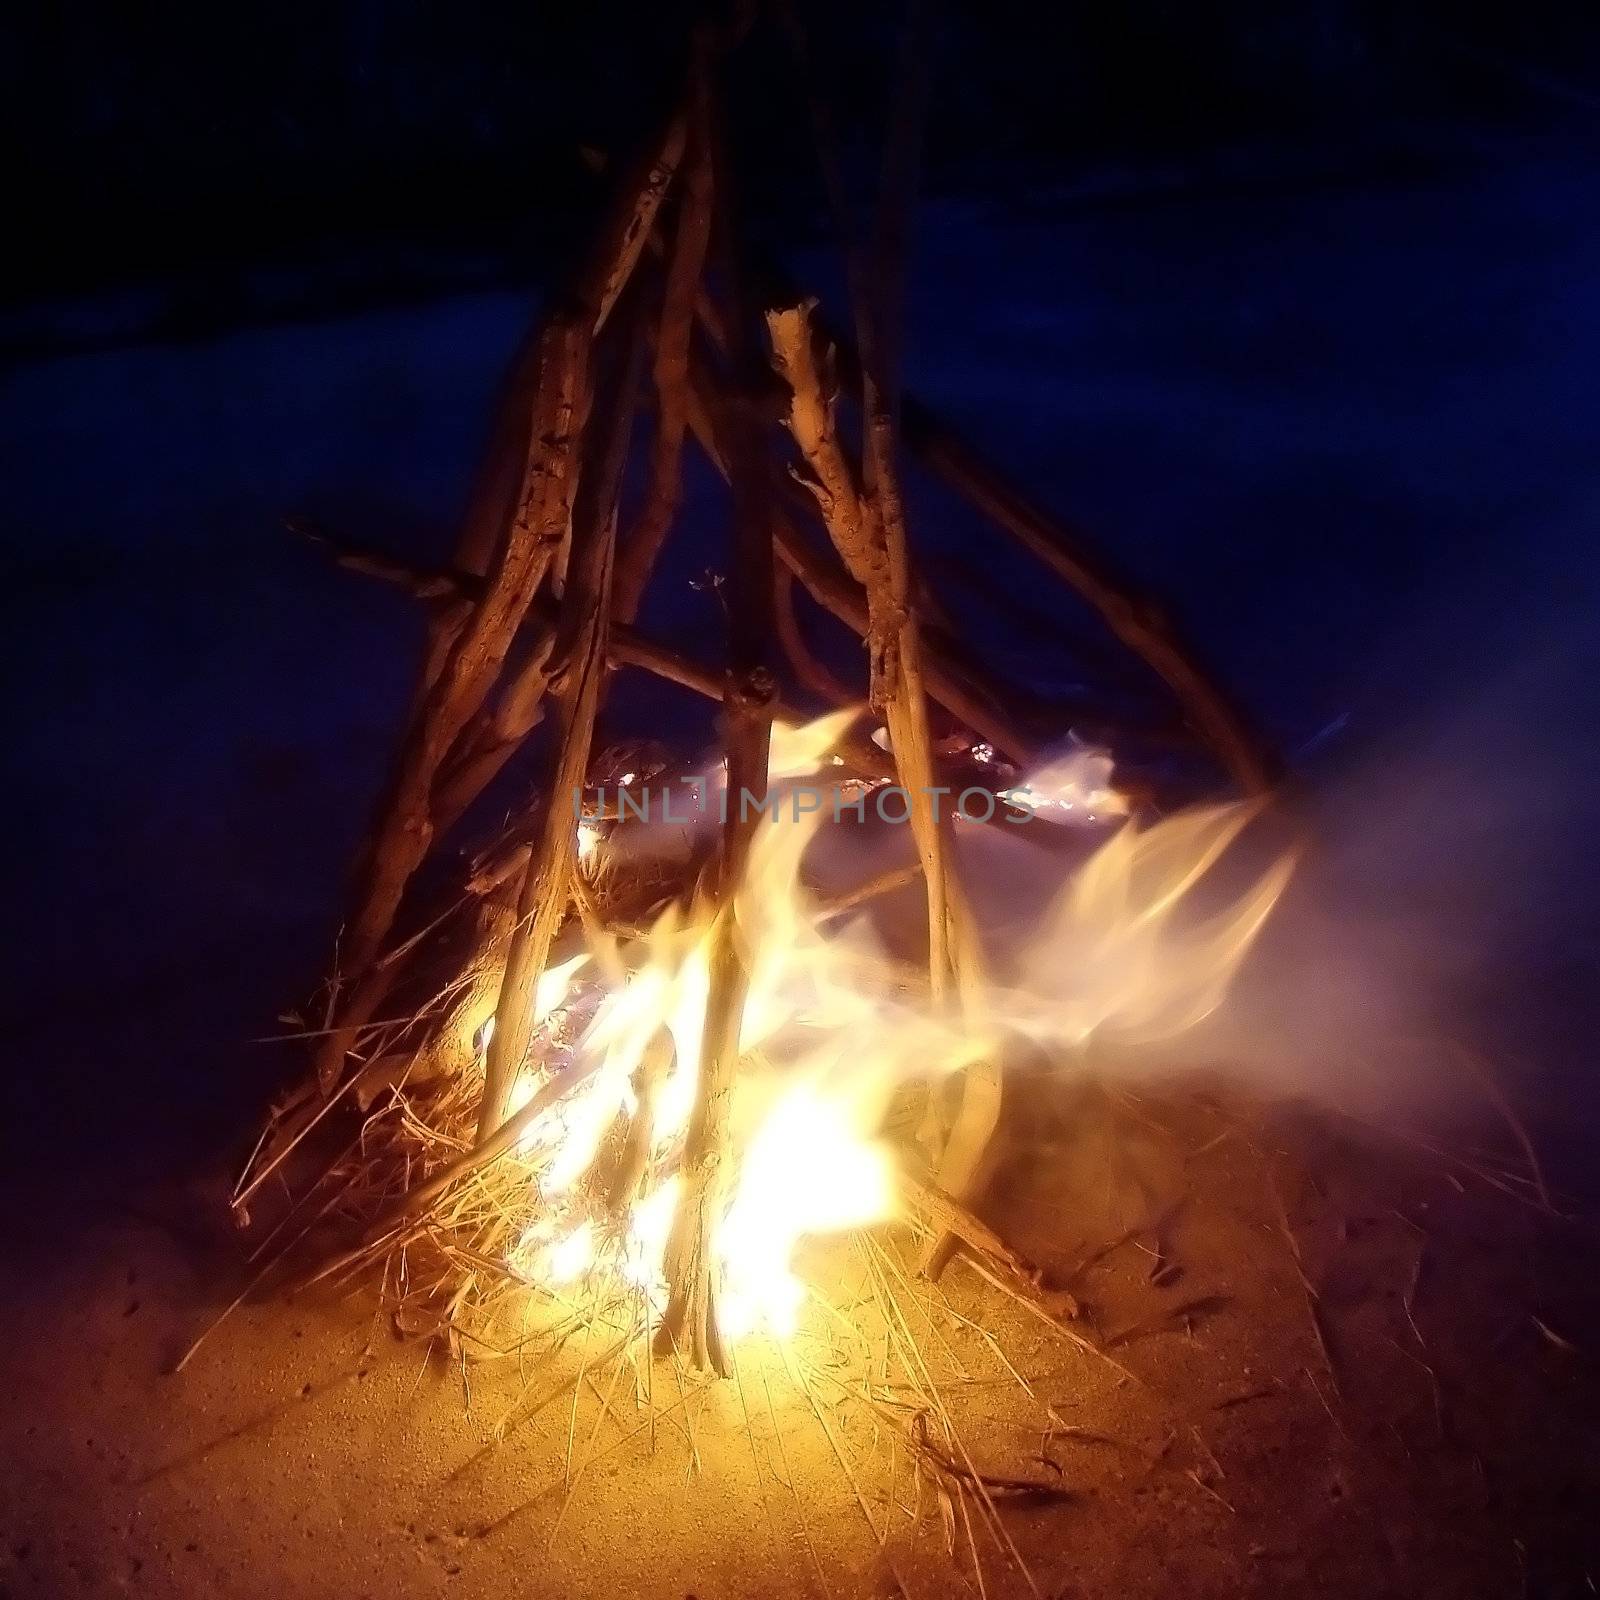 a small bonfire blazes in the night